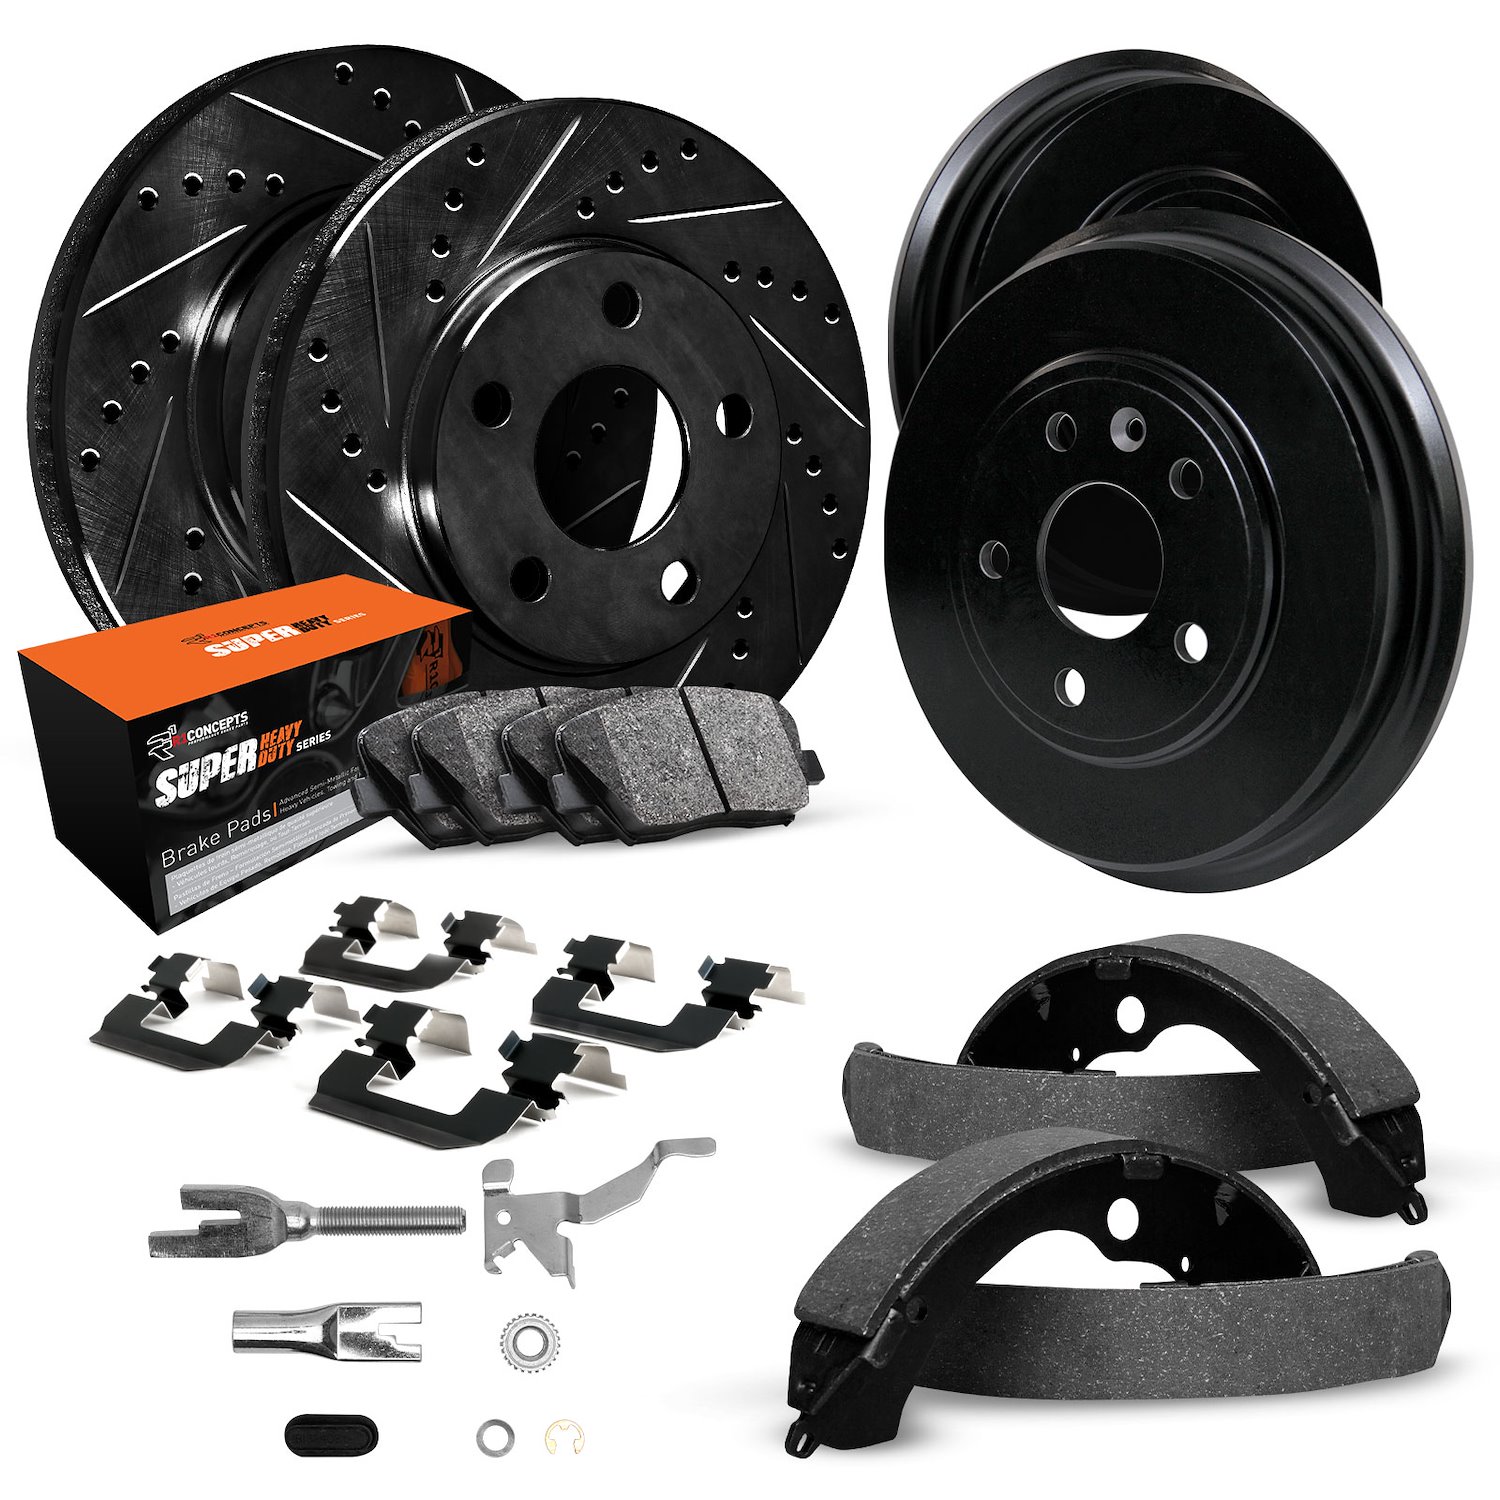 E-Line Drilled/Slotted Black Rotor & Drum Set w/Super-Duty Pads, Shoes, Hardware/Adjusters, 2008-2013 GM